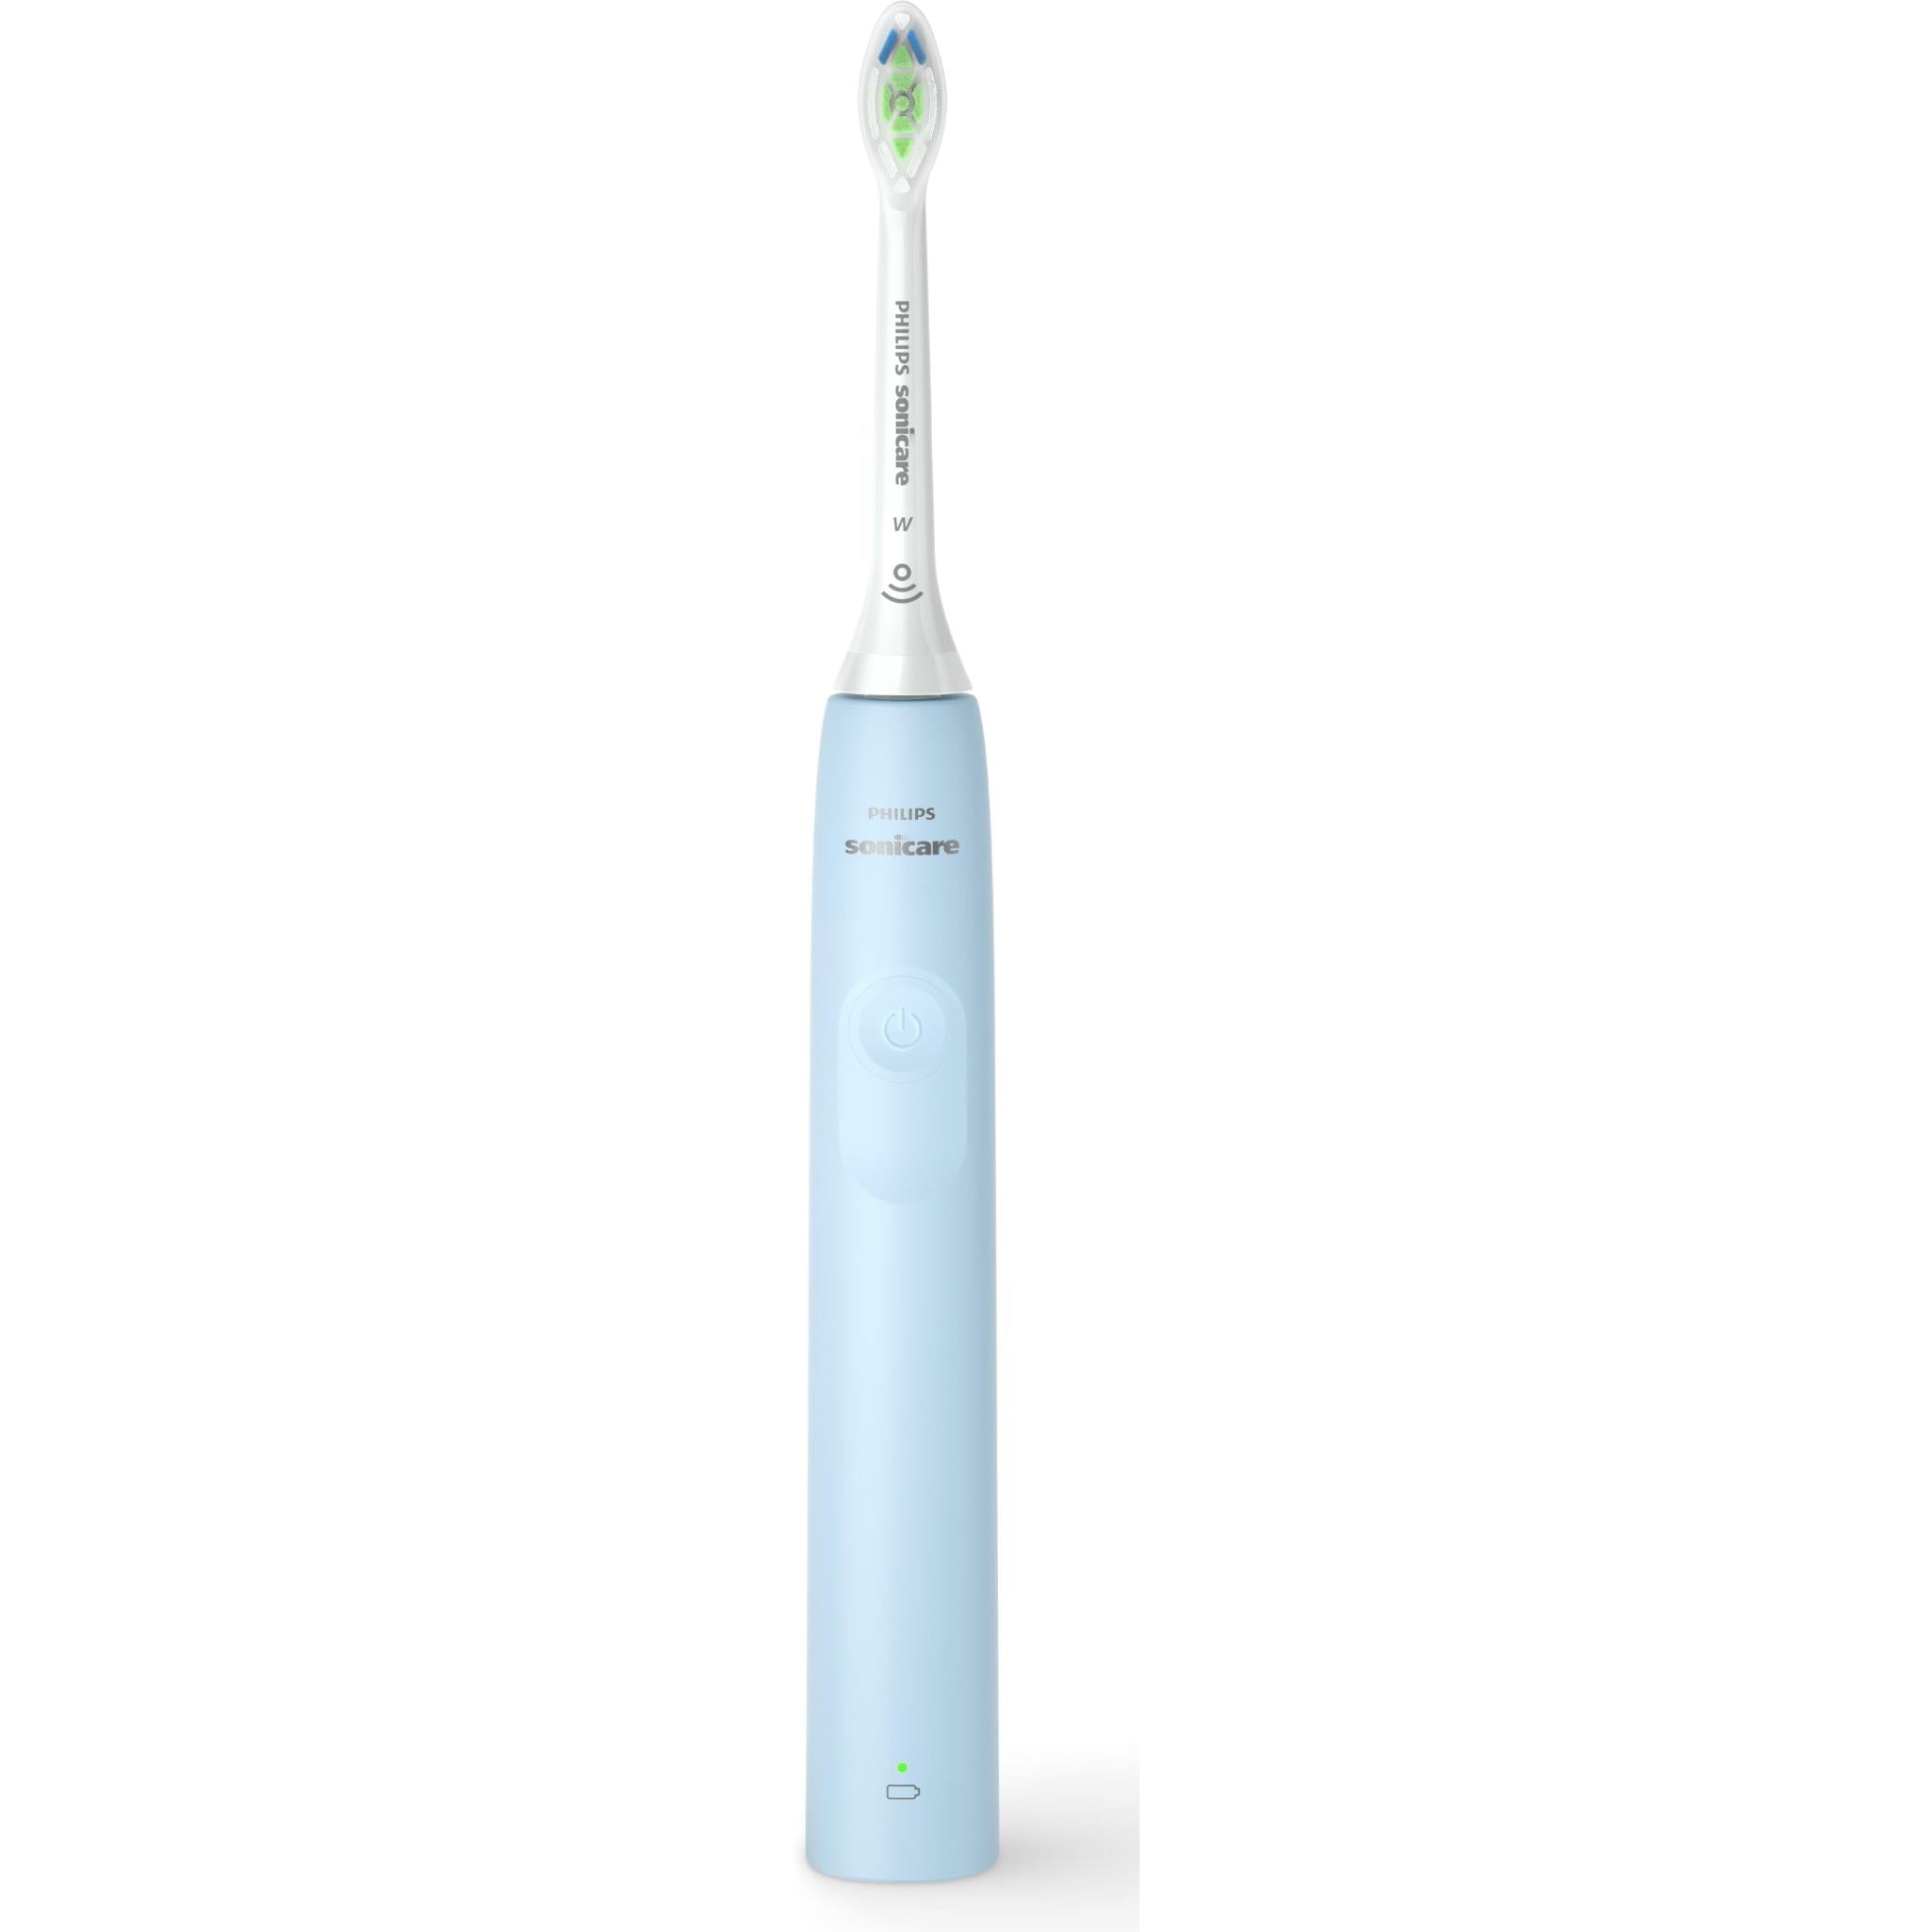 philips sonicare 2000 electric toothbrush (light blue)